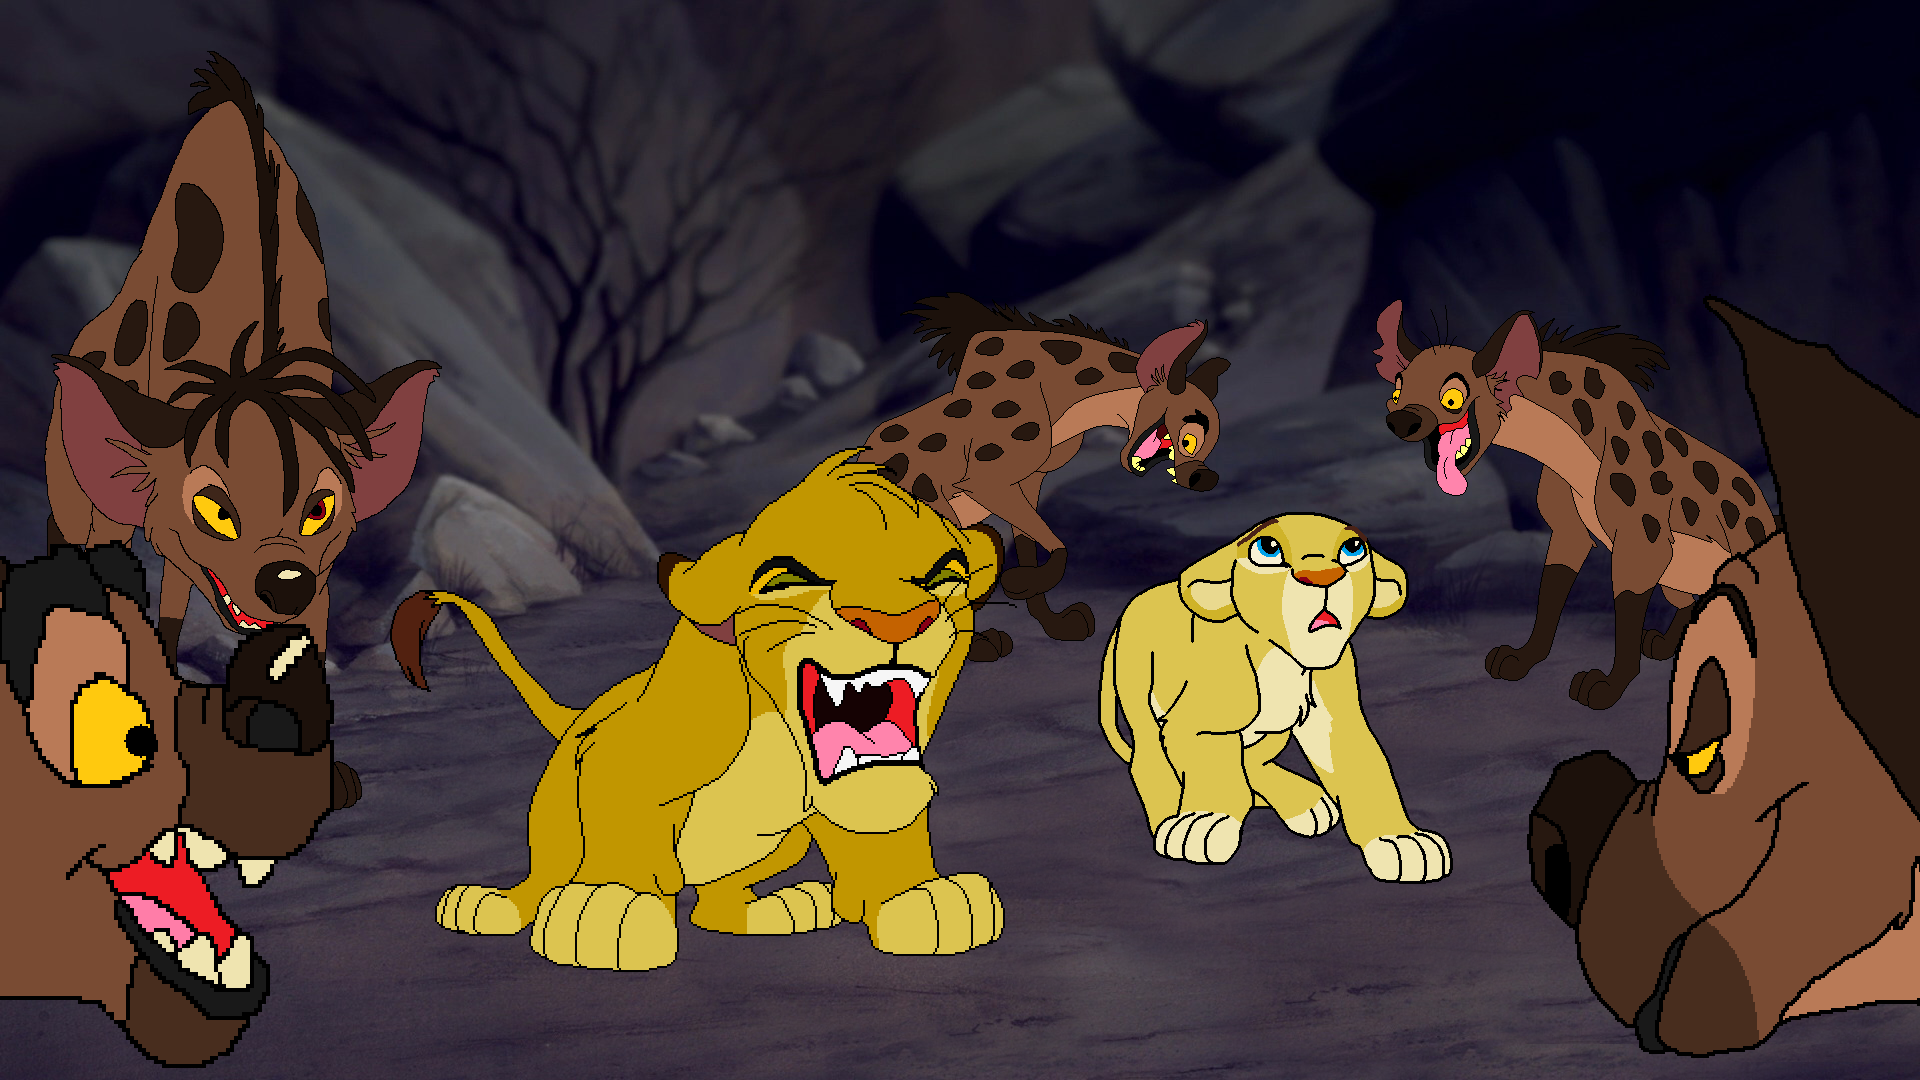 Lion King 19 Simba S Little Roar By Through The Movies On Deviantart